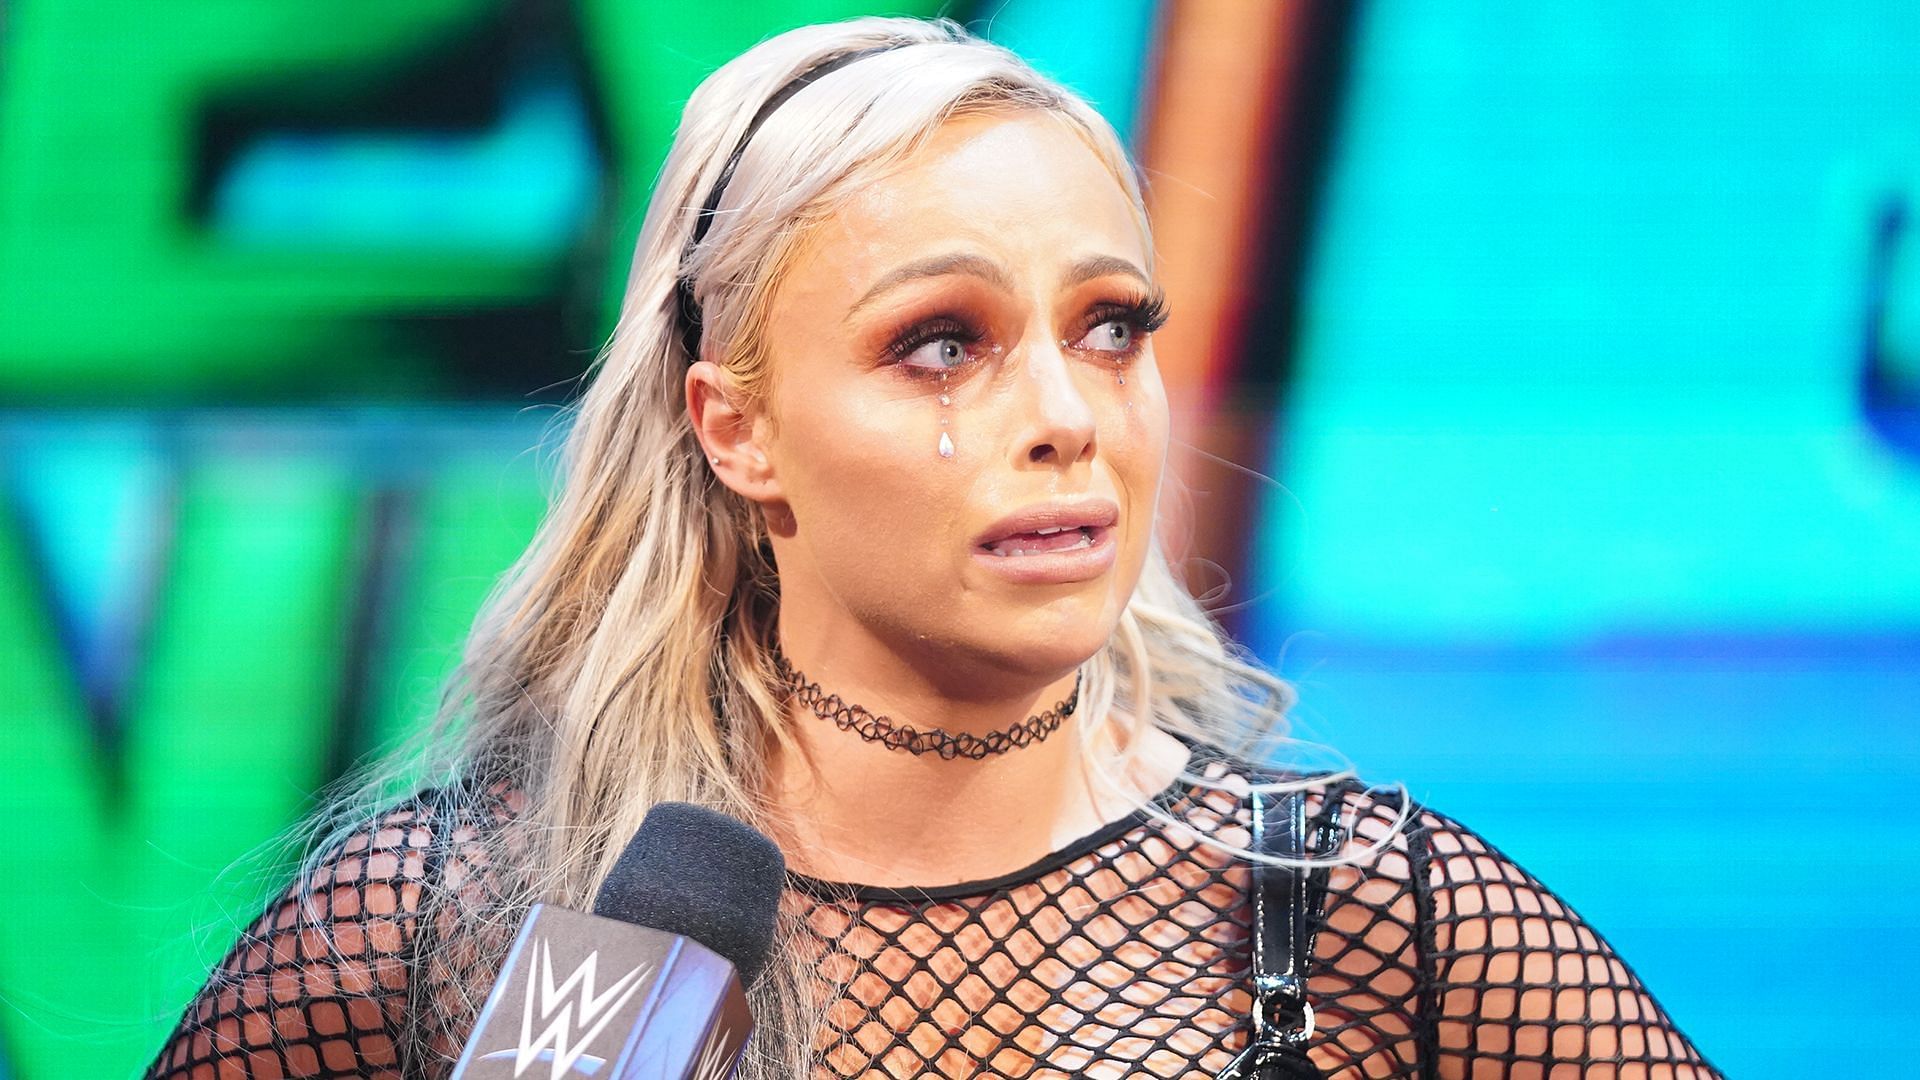 Liv Morgan discloses personal message from WWE Hall of Famer ahead of RAW